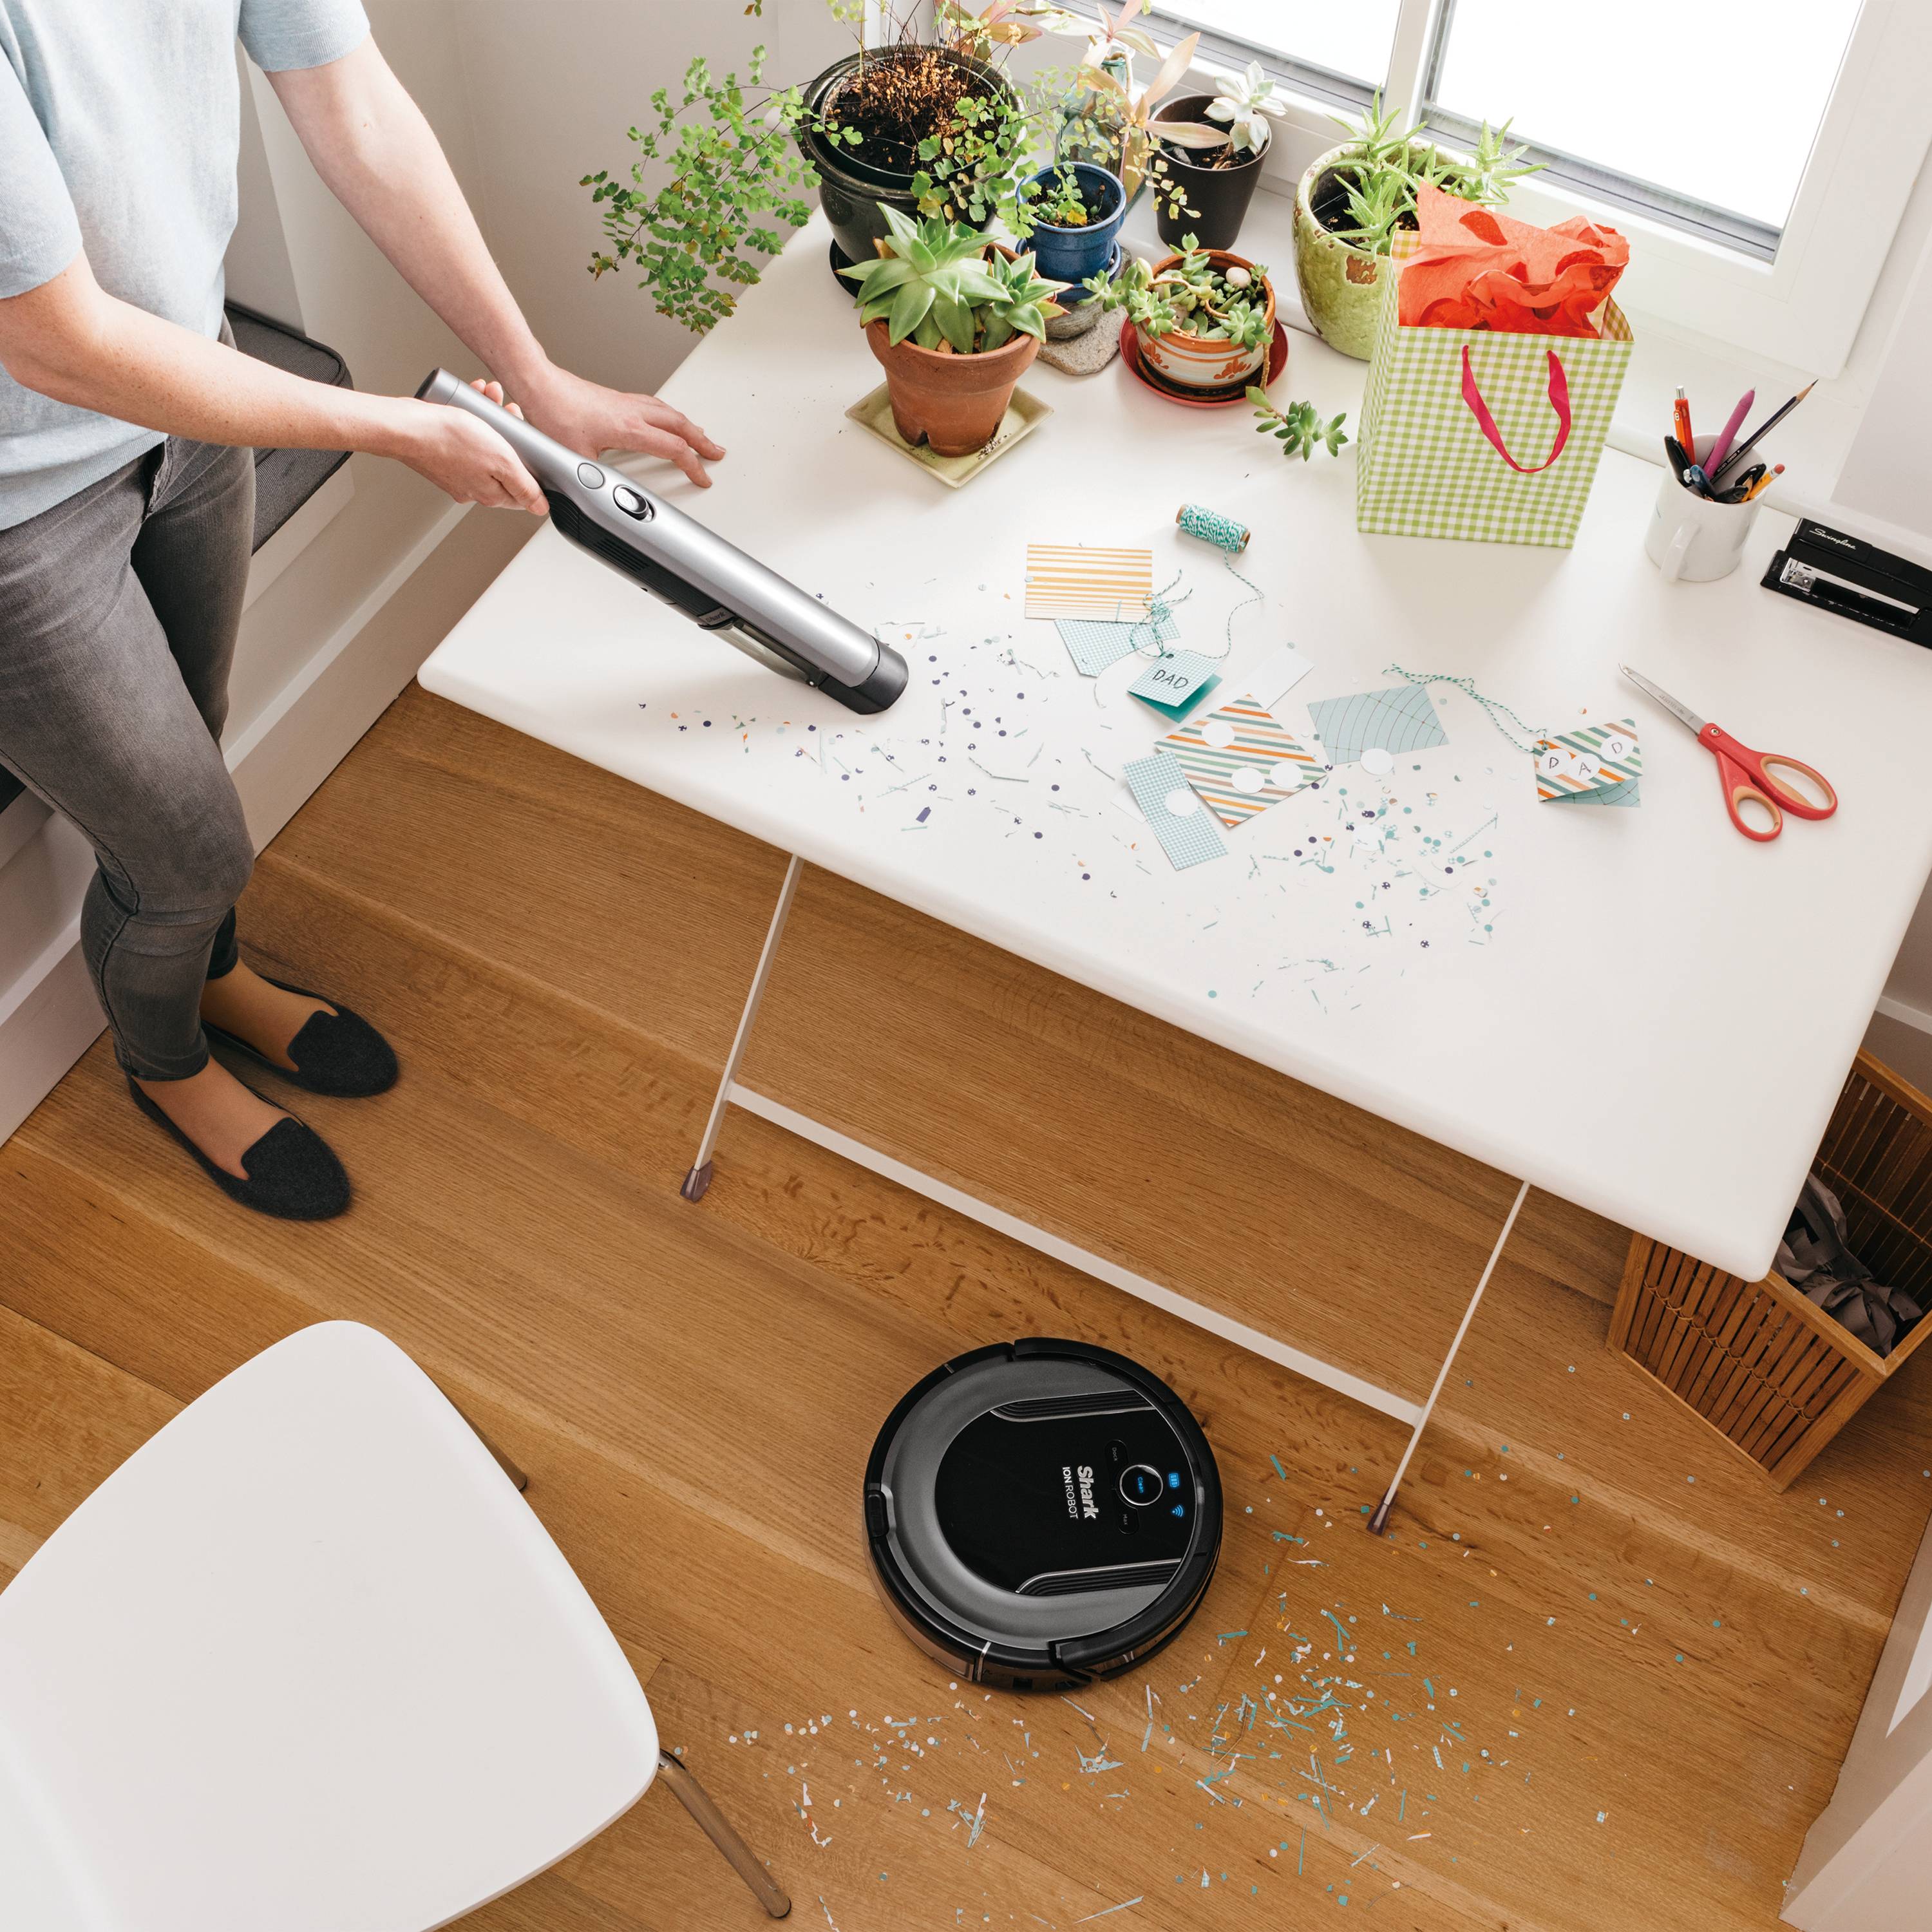 SHARK ION Robot Vacuum Cleaning System with Detachable Hand Vacuum, S86 with Wi-Fi - RV850WV - image 10 of 10